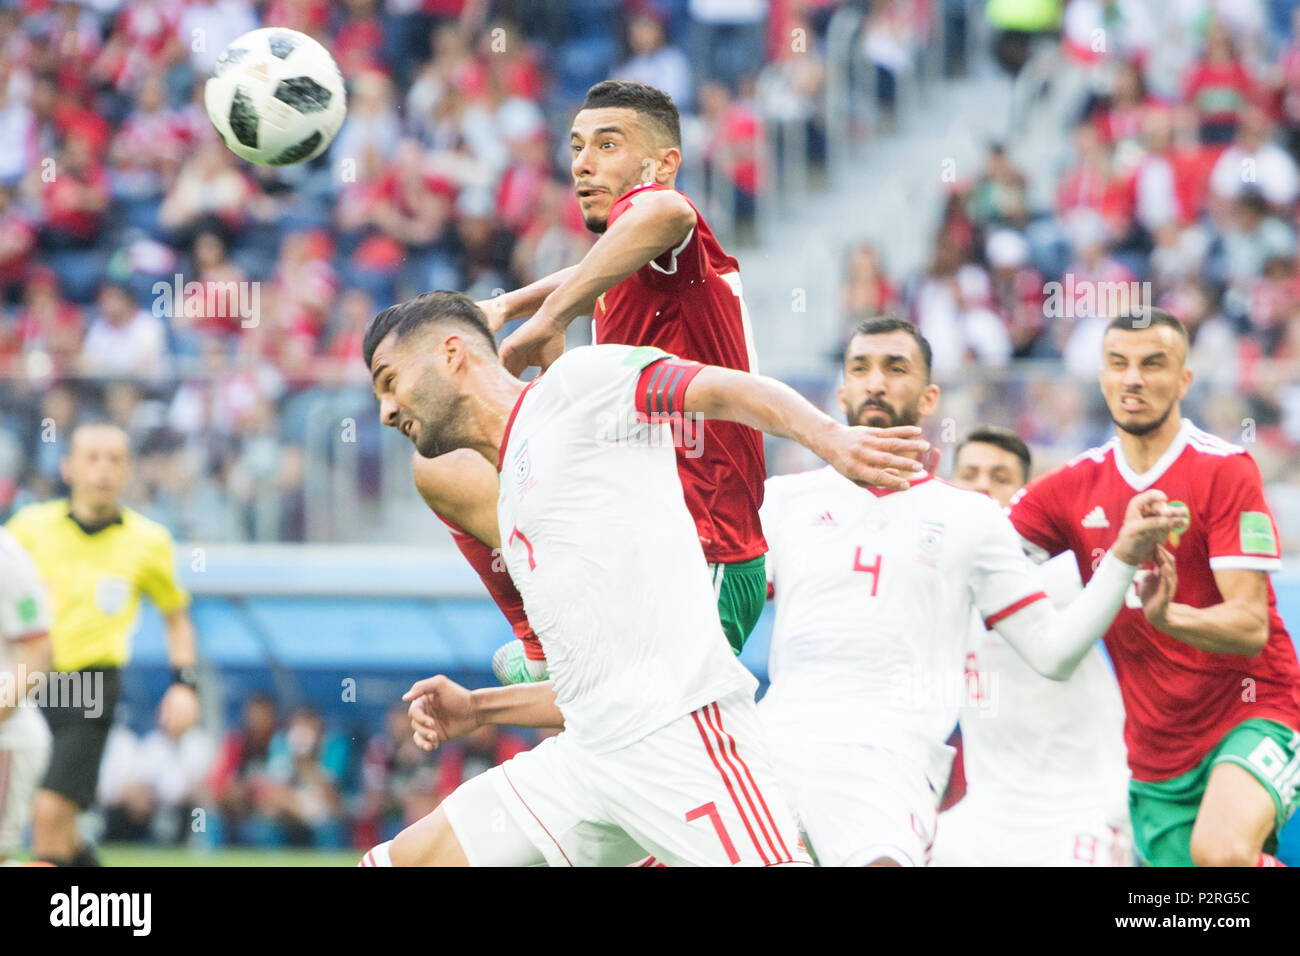 Fltr. Masoud SHOJAEI (IRN) Younes BELHANDA (MAR), Roozbeh CHESHMI (IRN), Romain SAISS (MAR) in the fight for the ball, Action, Morocco (MAR) - Iran (IRN) 0: 1, Preliminary Round, Group B, Game 4, on 15.06.2018 in St.Petersburg; Football World Cup 2018 in Russia from 14.06. - 15.07.2018. | usage worldwide Stock Photo